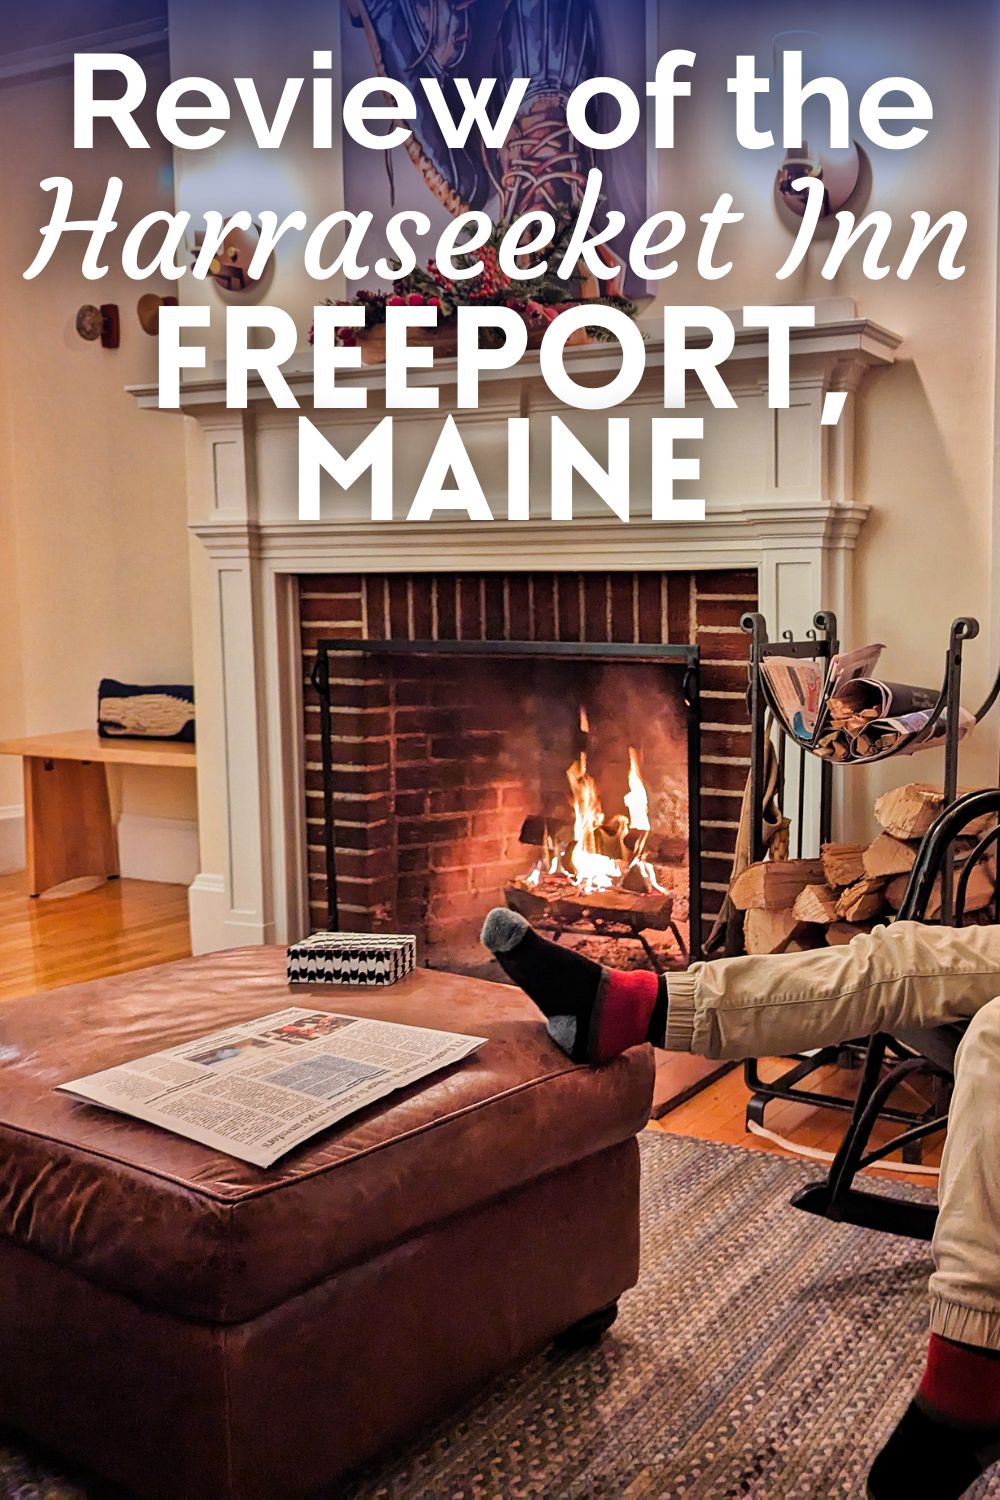 The Harraseeket Inn in Freeport, Maine is one of the coziest, peaceful places we've stayed. Get the details on staying at the Harraseeket, things to do in Freeport, and ideas for visiting Maine in any season.